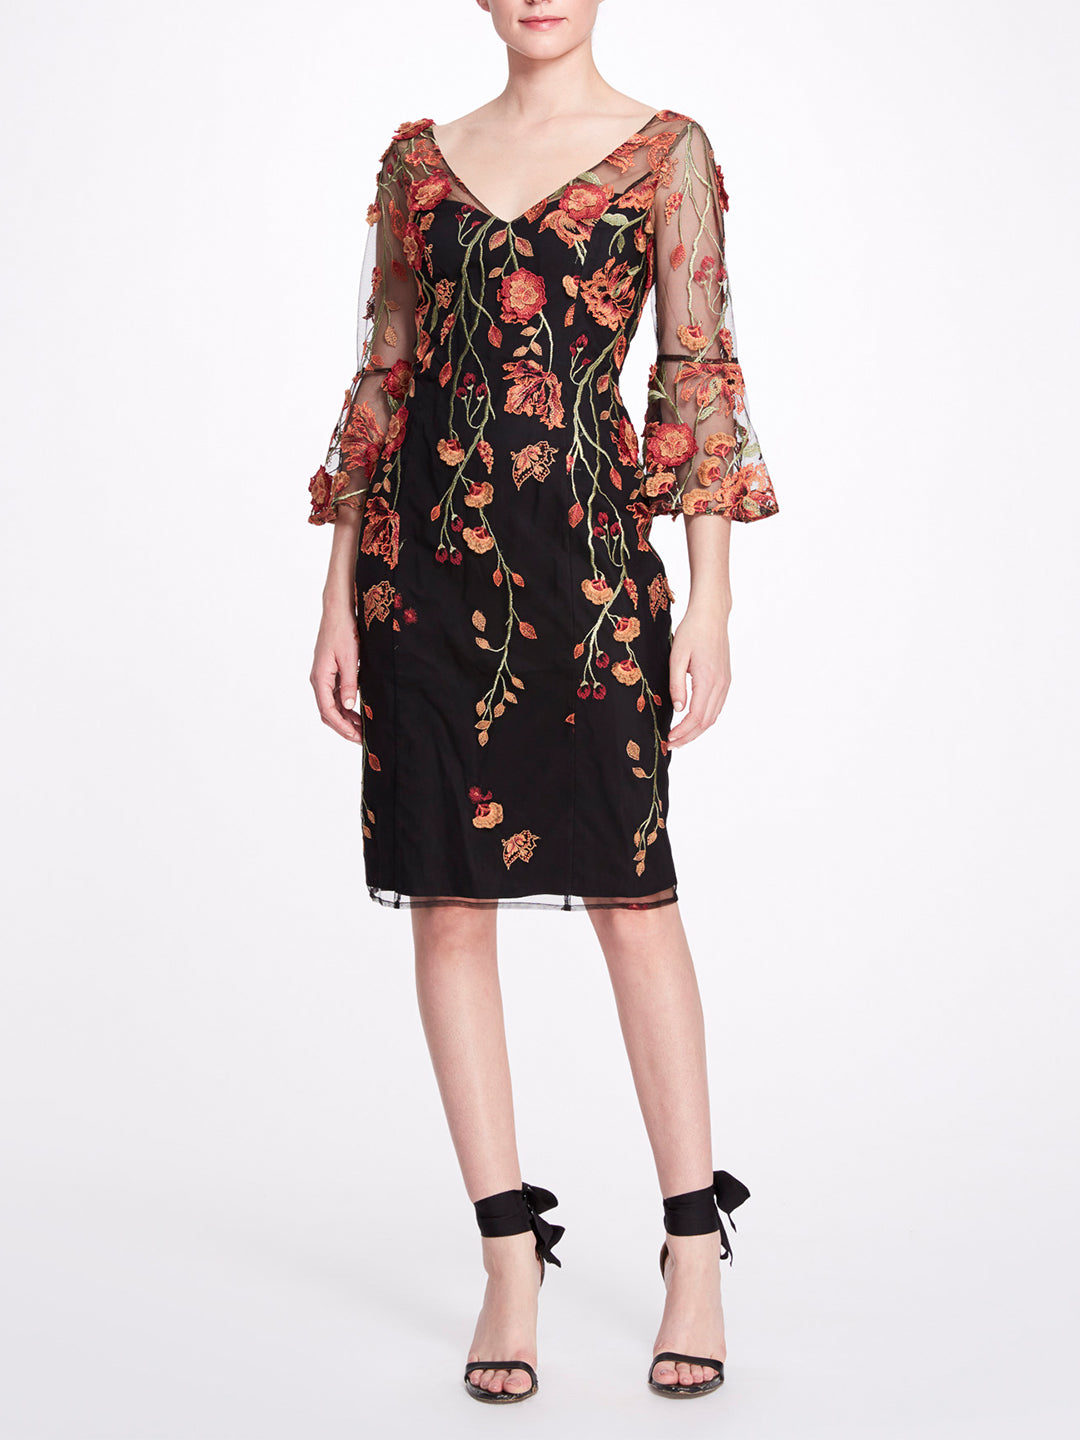 Embroidered Floral Cocktail Dress Marchesa